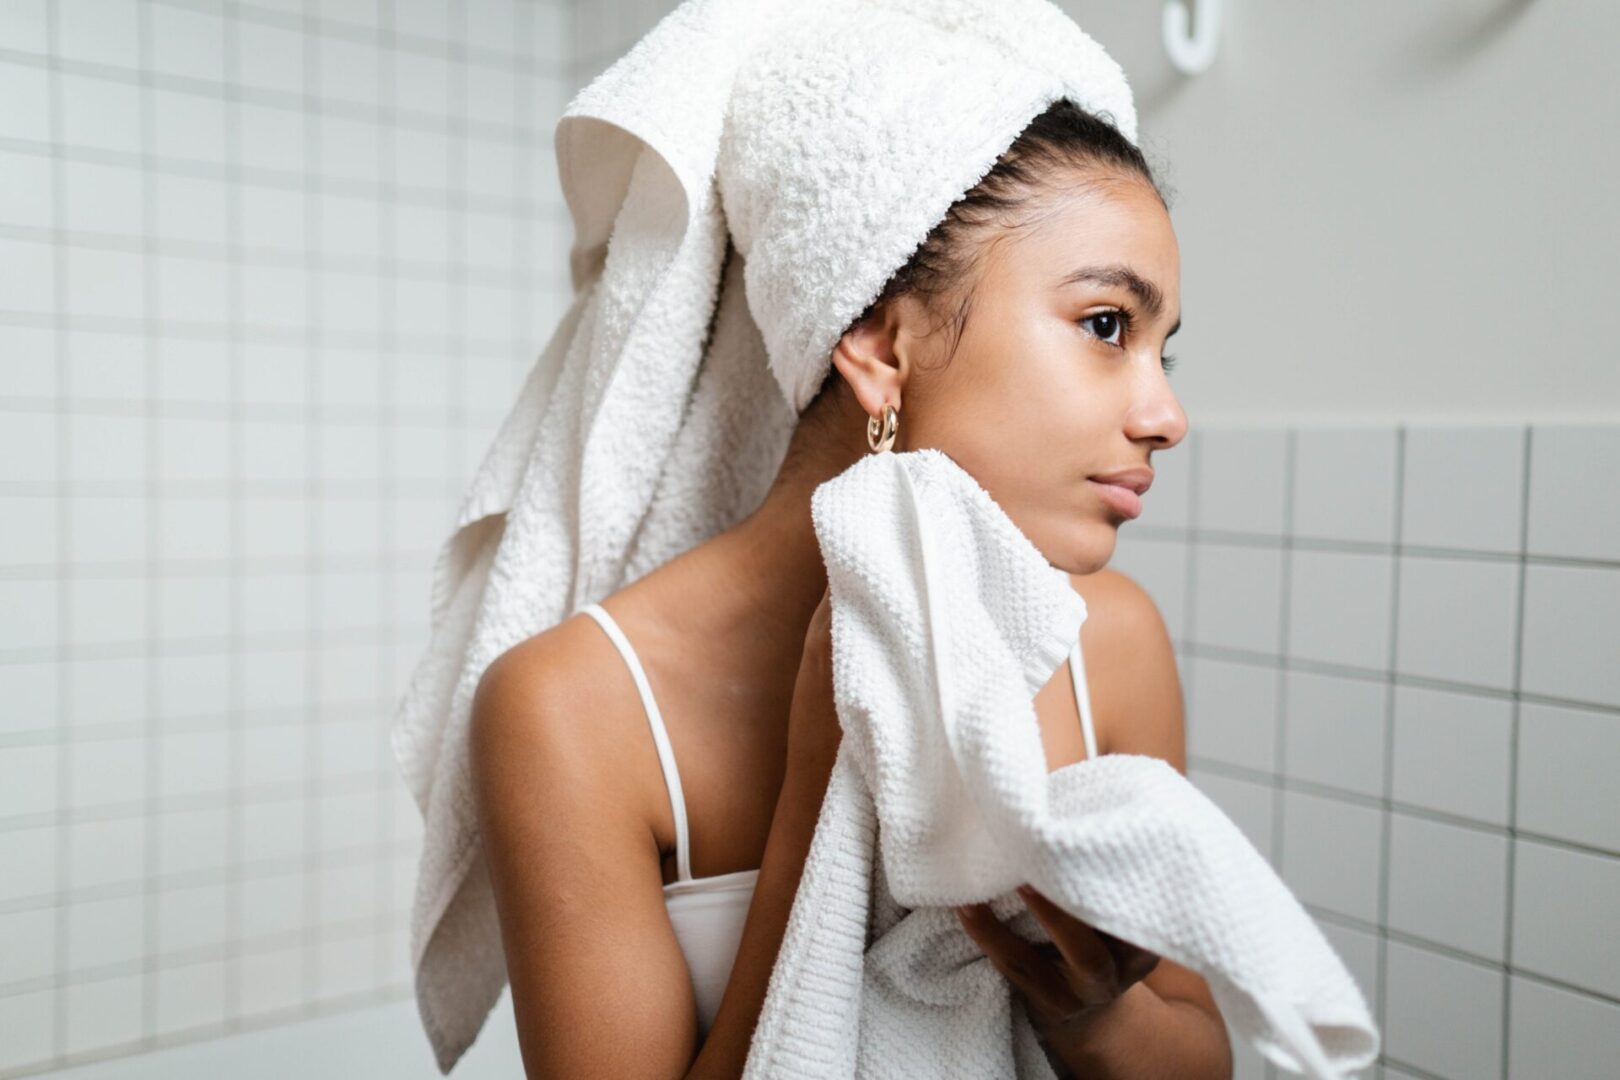 A woman in white towel holding her hair.